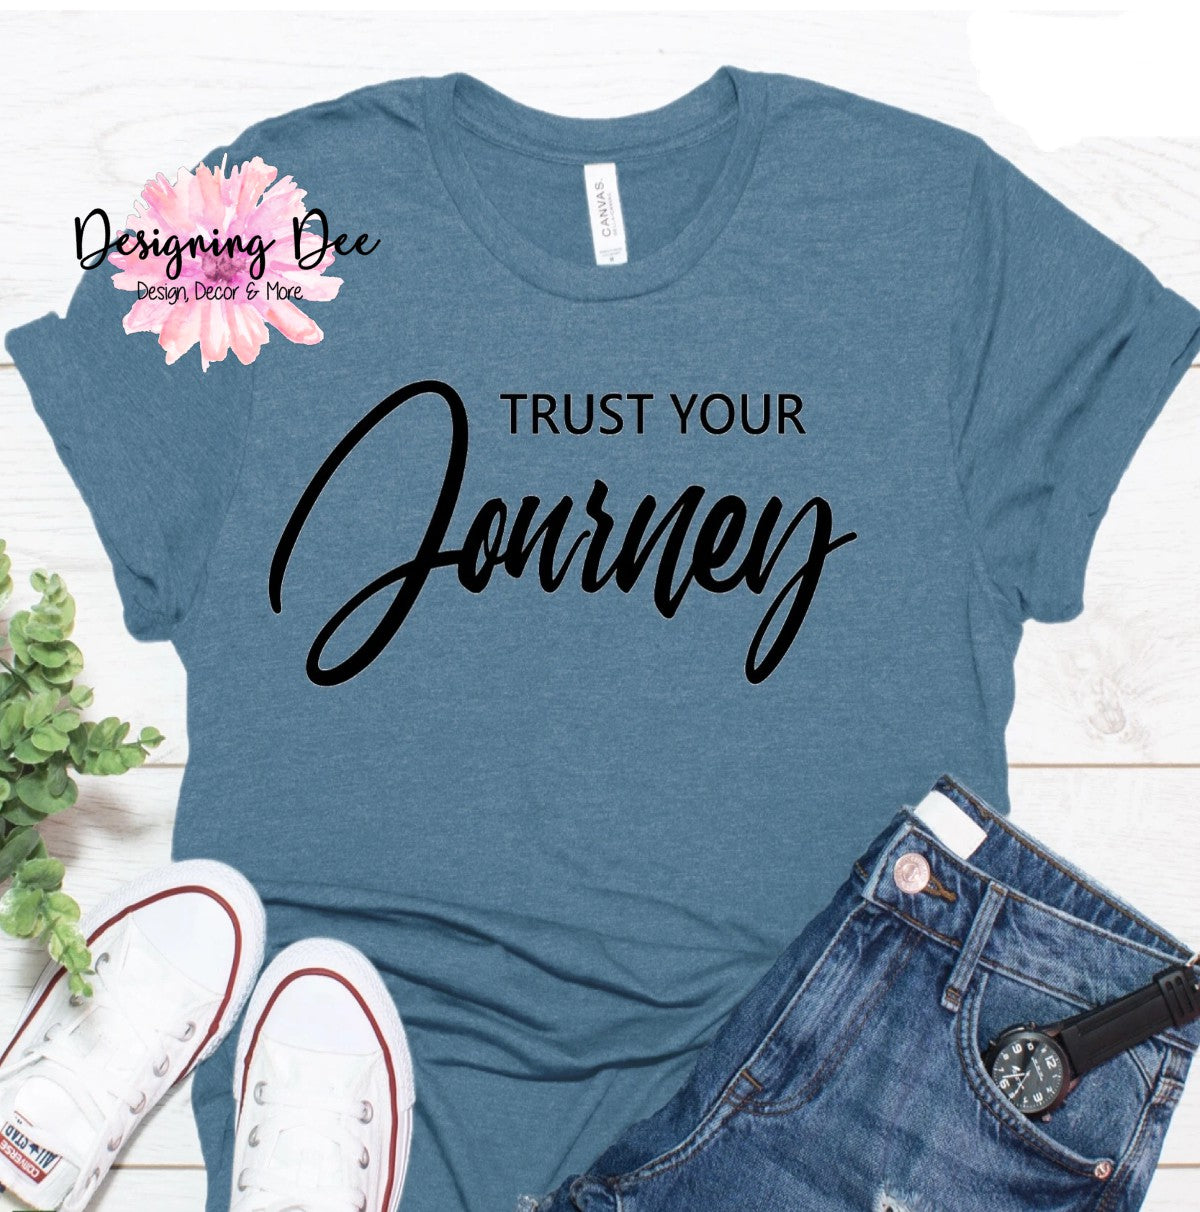 Trust Your Journey Graphic T-Shirt for Women